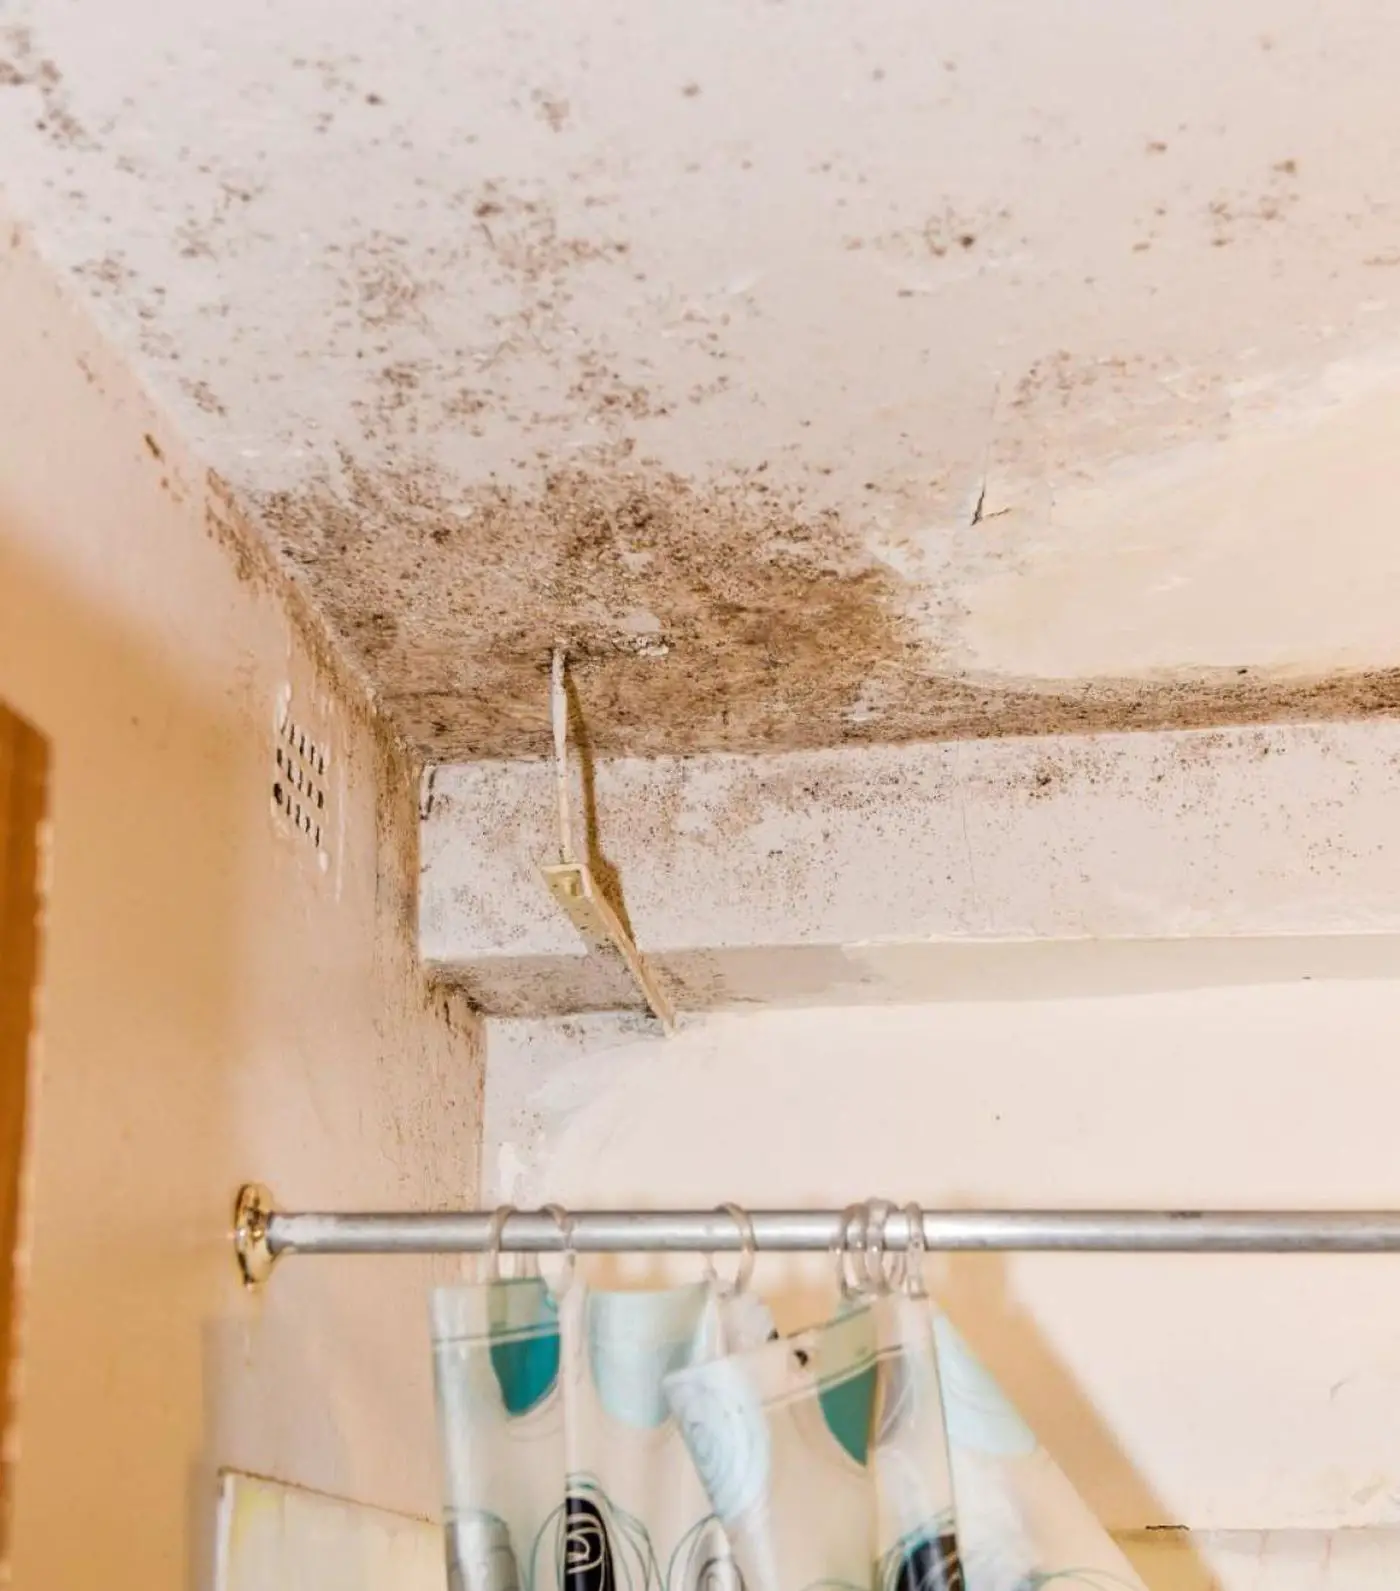 How To Sue An Apartment Complex For Mold